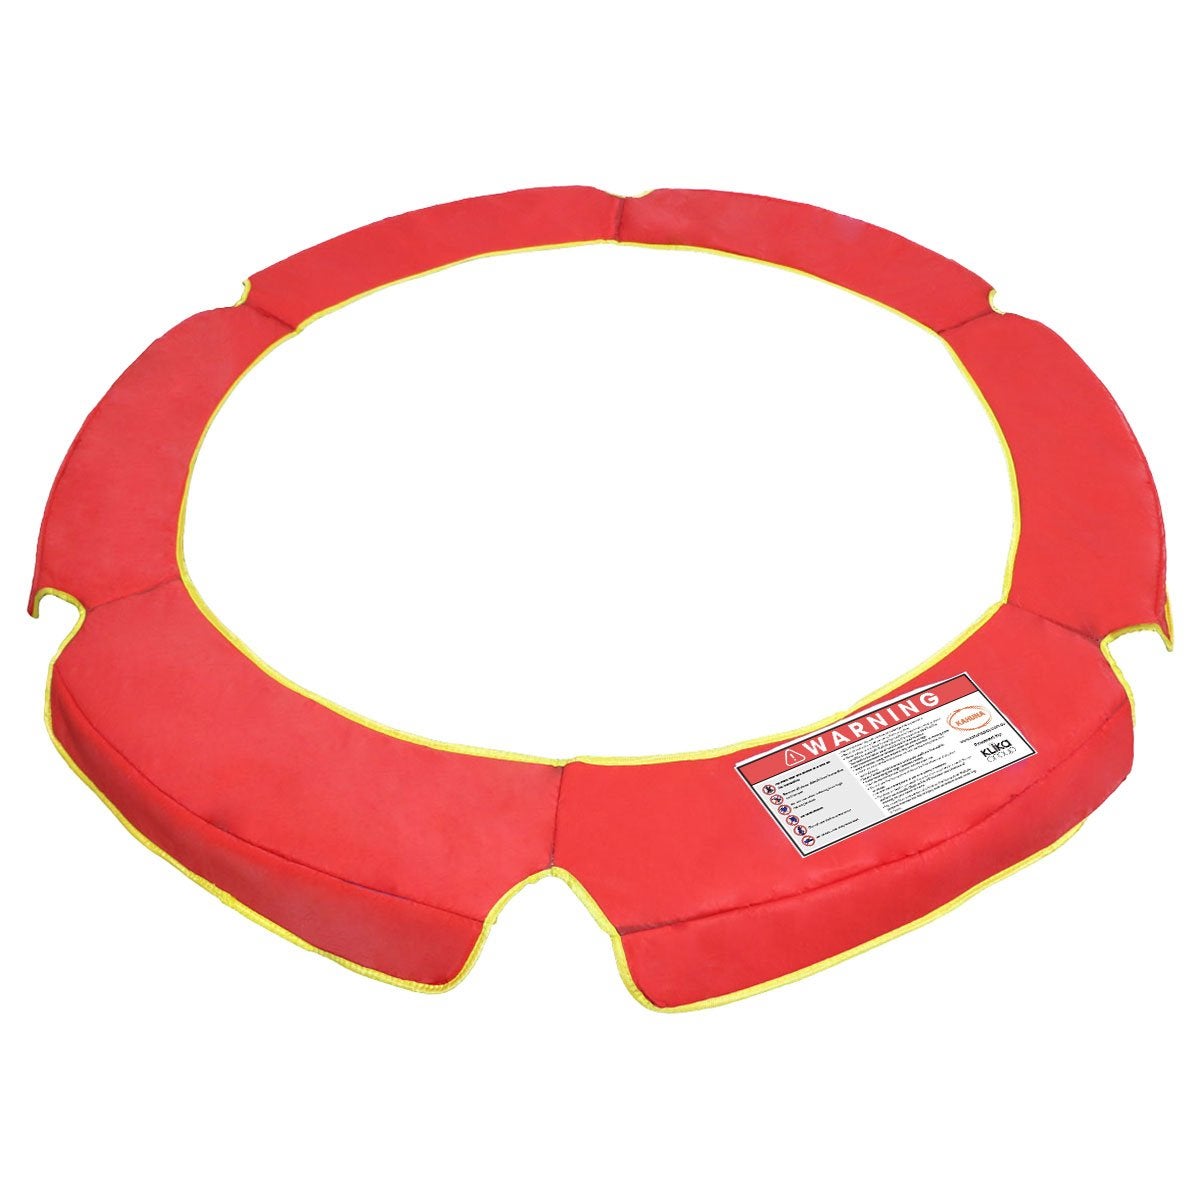 4.5ft Trampoline Replacement Safety Spring Pad Round Cover Red